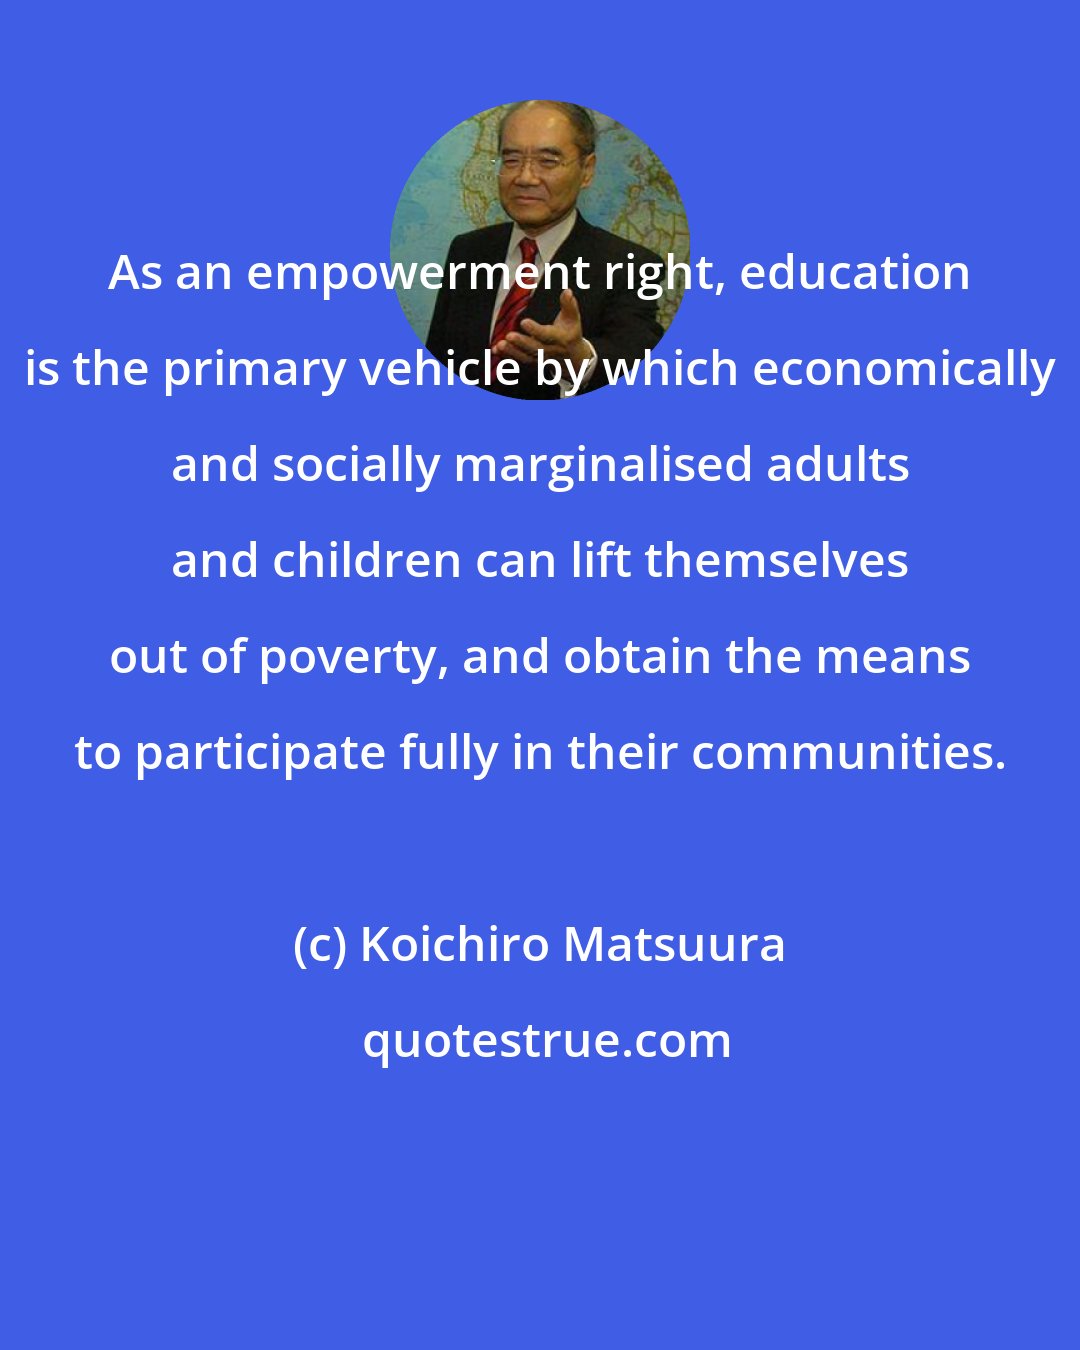 Koichiro Matsuura: As an empowerment right, education is the primary vehicle by which economically and socially marginalised adults and children can lift themselves out of poverty, and obtain the means to participate fully in their communities.